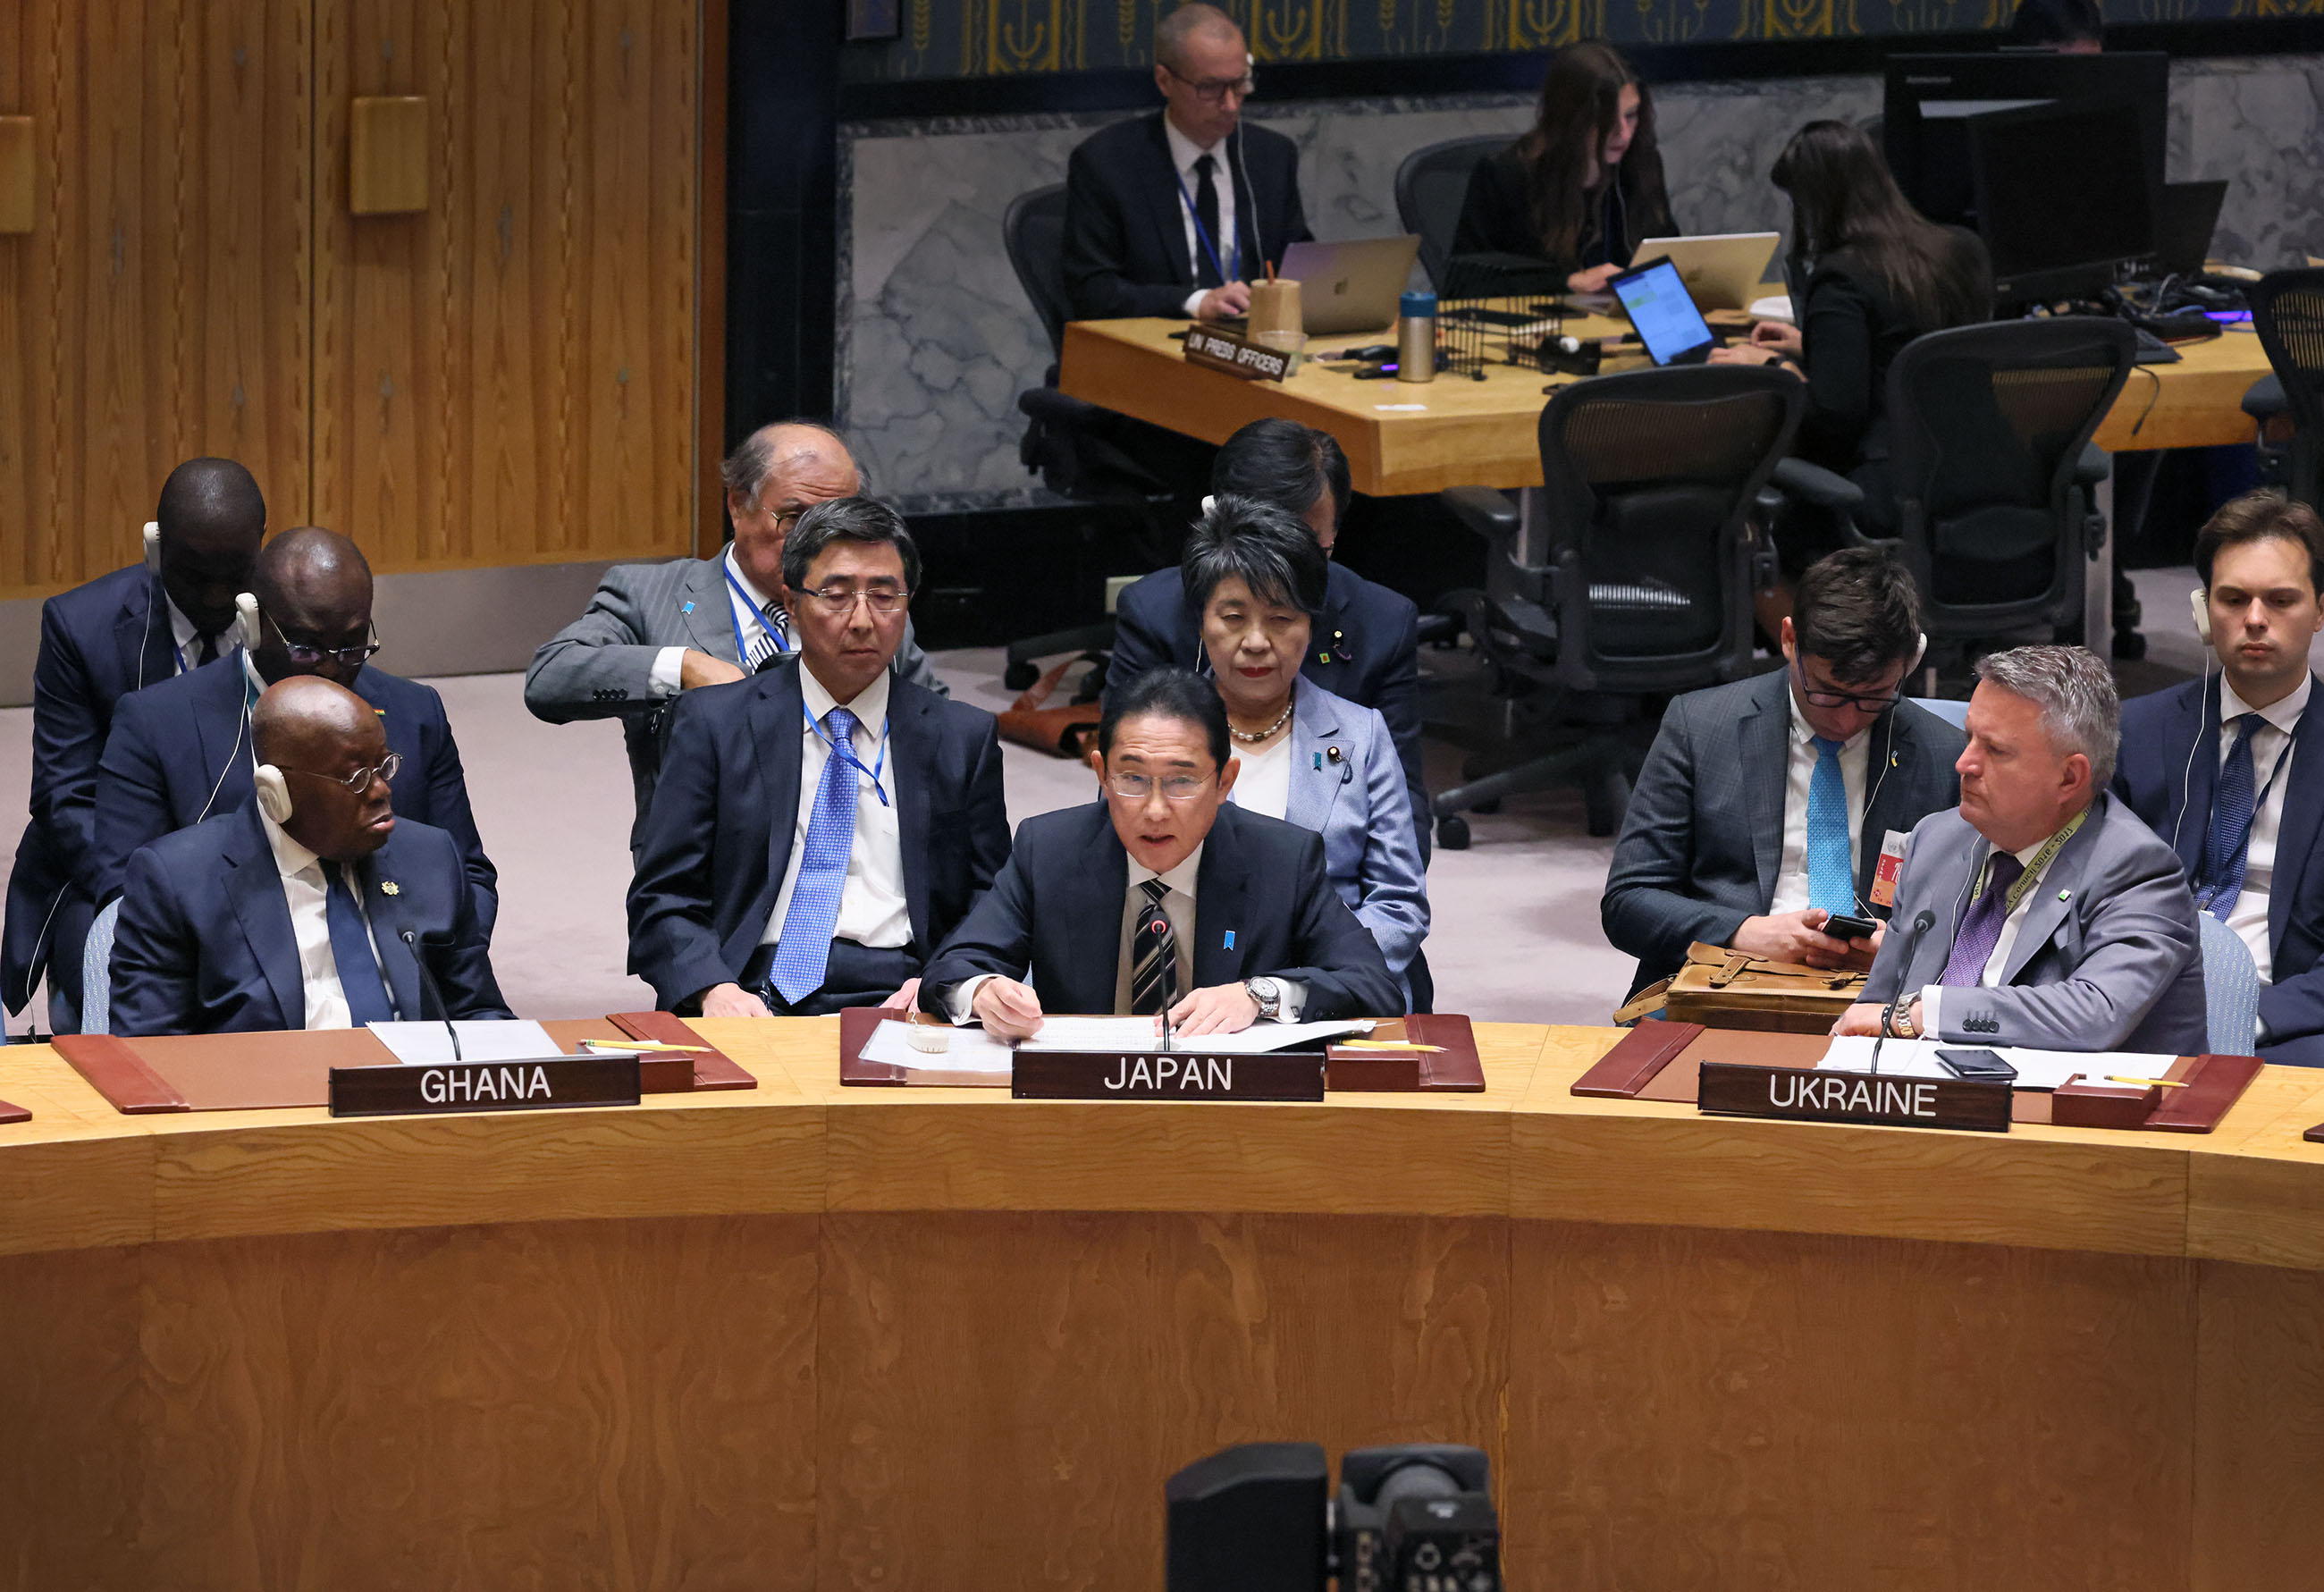 Prime Minister Kishida attending the Security Council High Level Open Debate on “Upholding the purposes and principles of the UN Charter through effective multilateralism: maintenance of peace and security of Ukraine” (1)